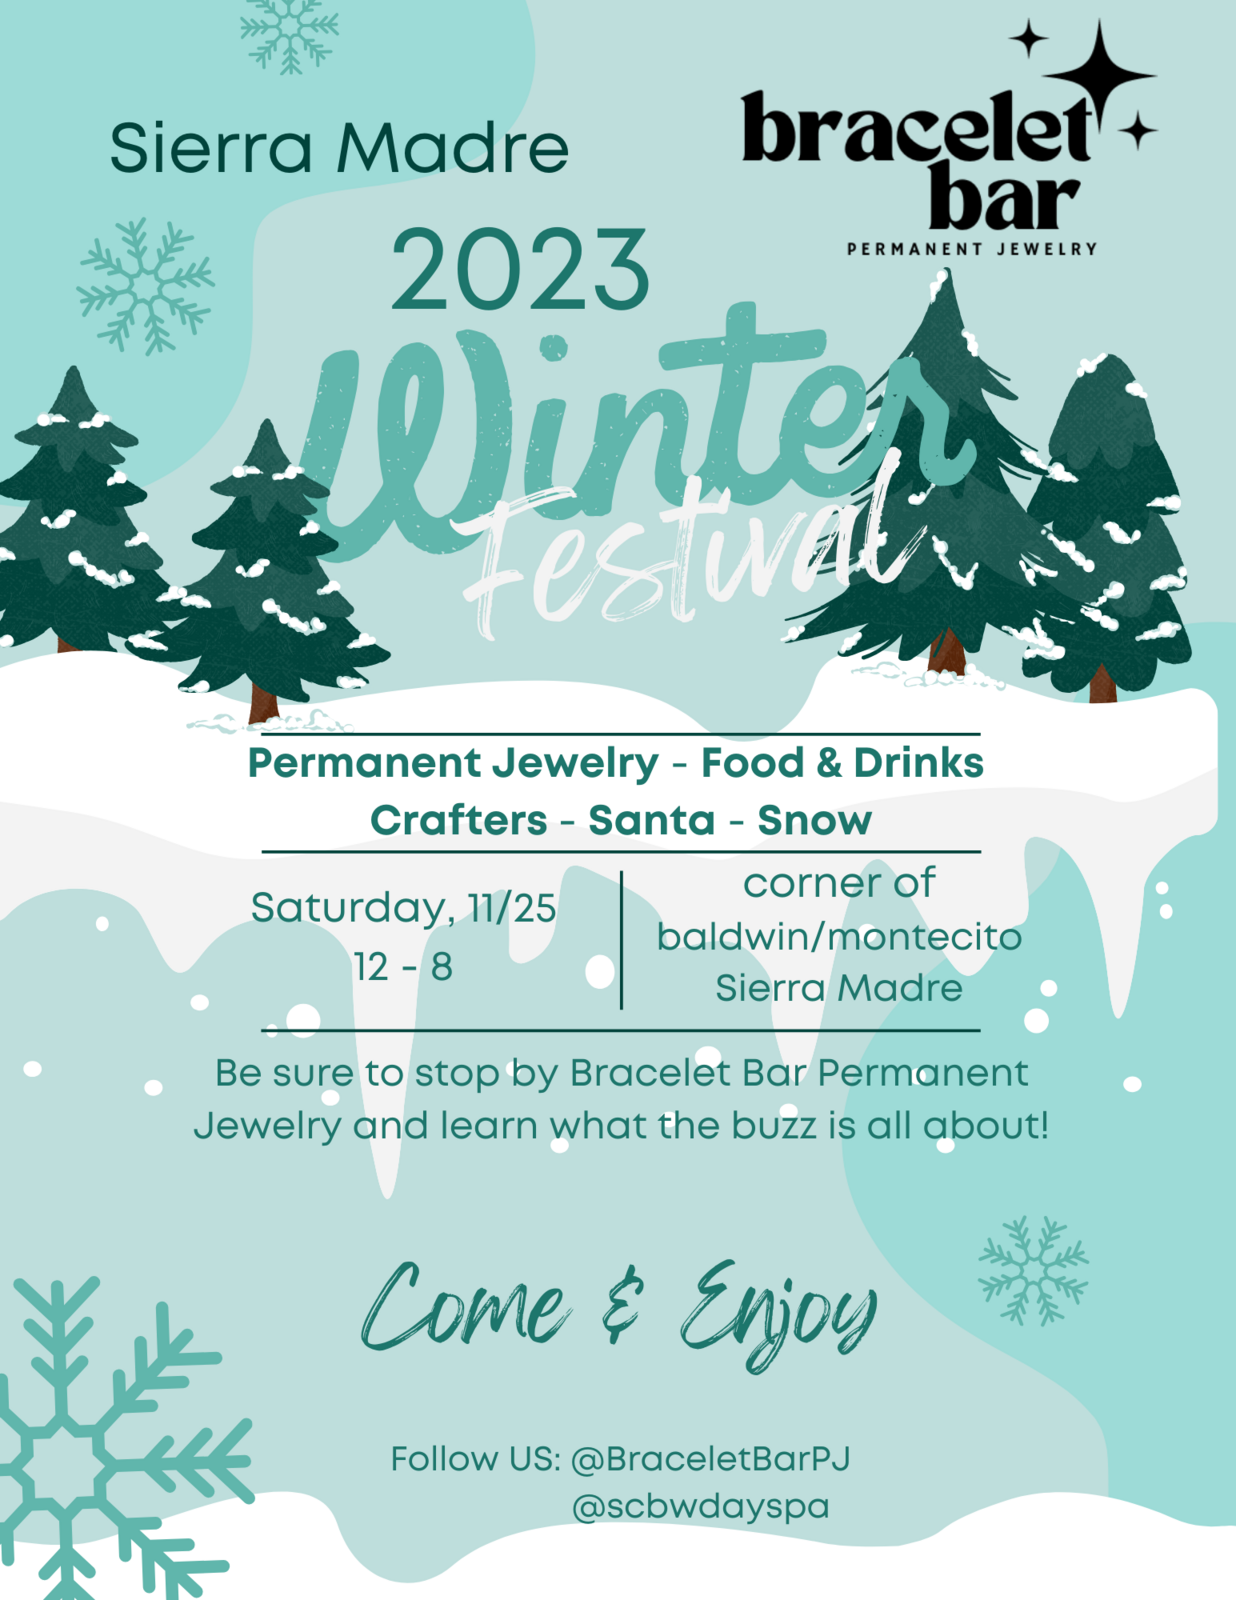 Bracelet Bar Permanent Jewelry will be at the Sierra Madre WINTER